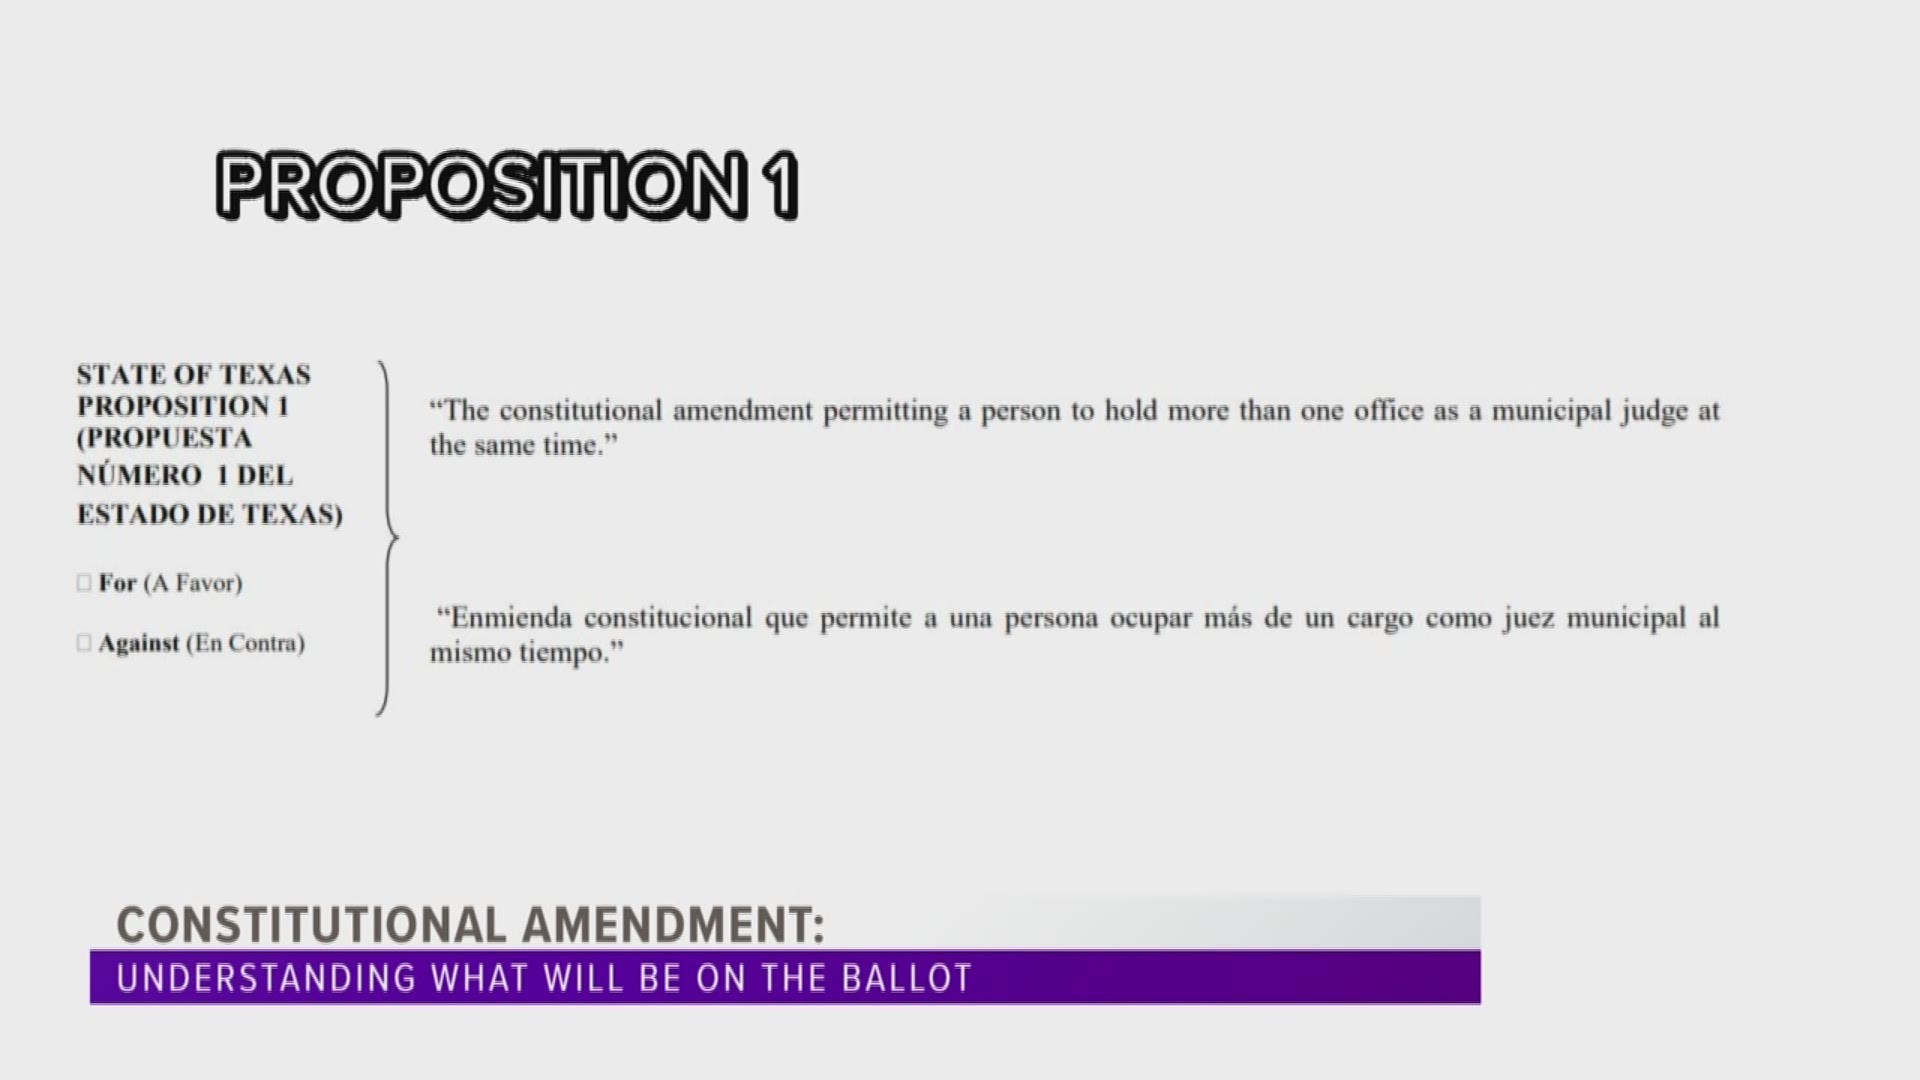 Understanding what the proposed Constitutional Amendments are on the